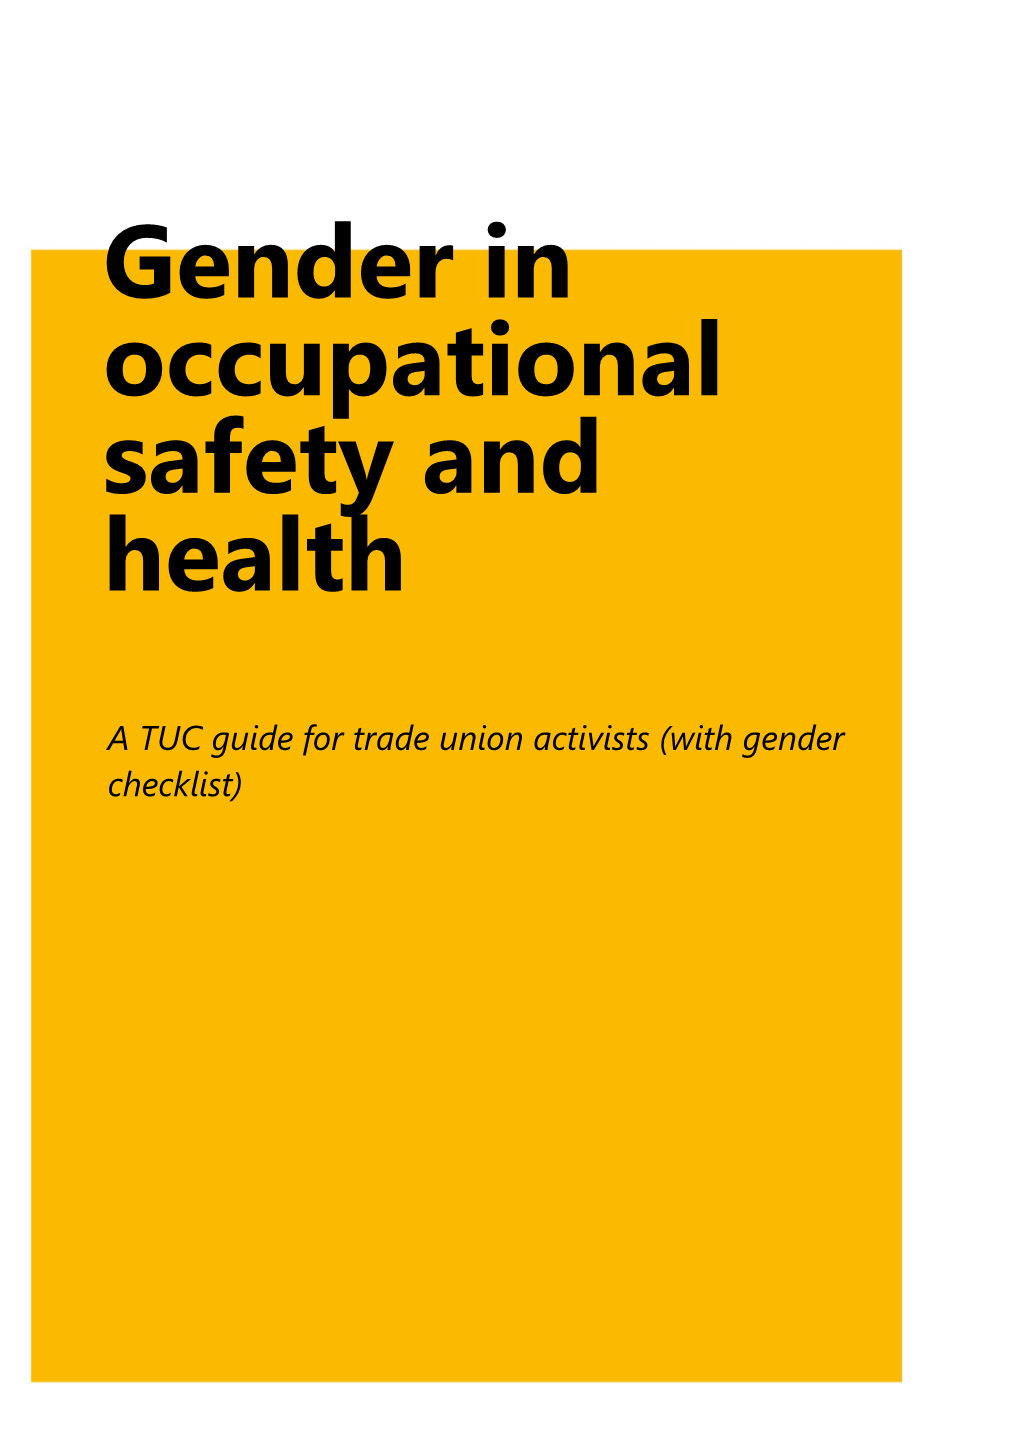 A TUC Guide for Trade Union Activists (With Gender Checklist)